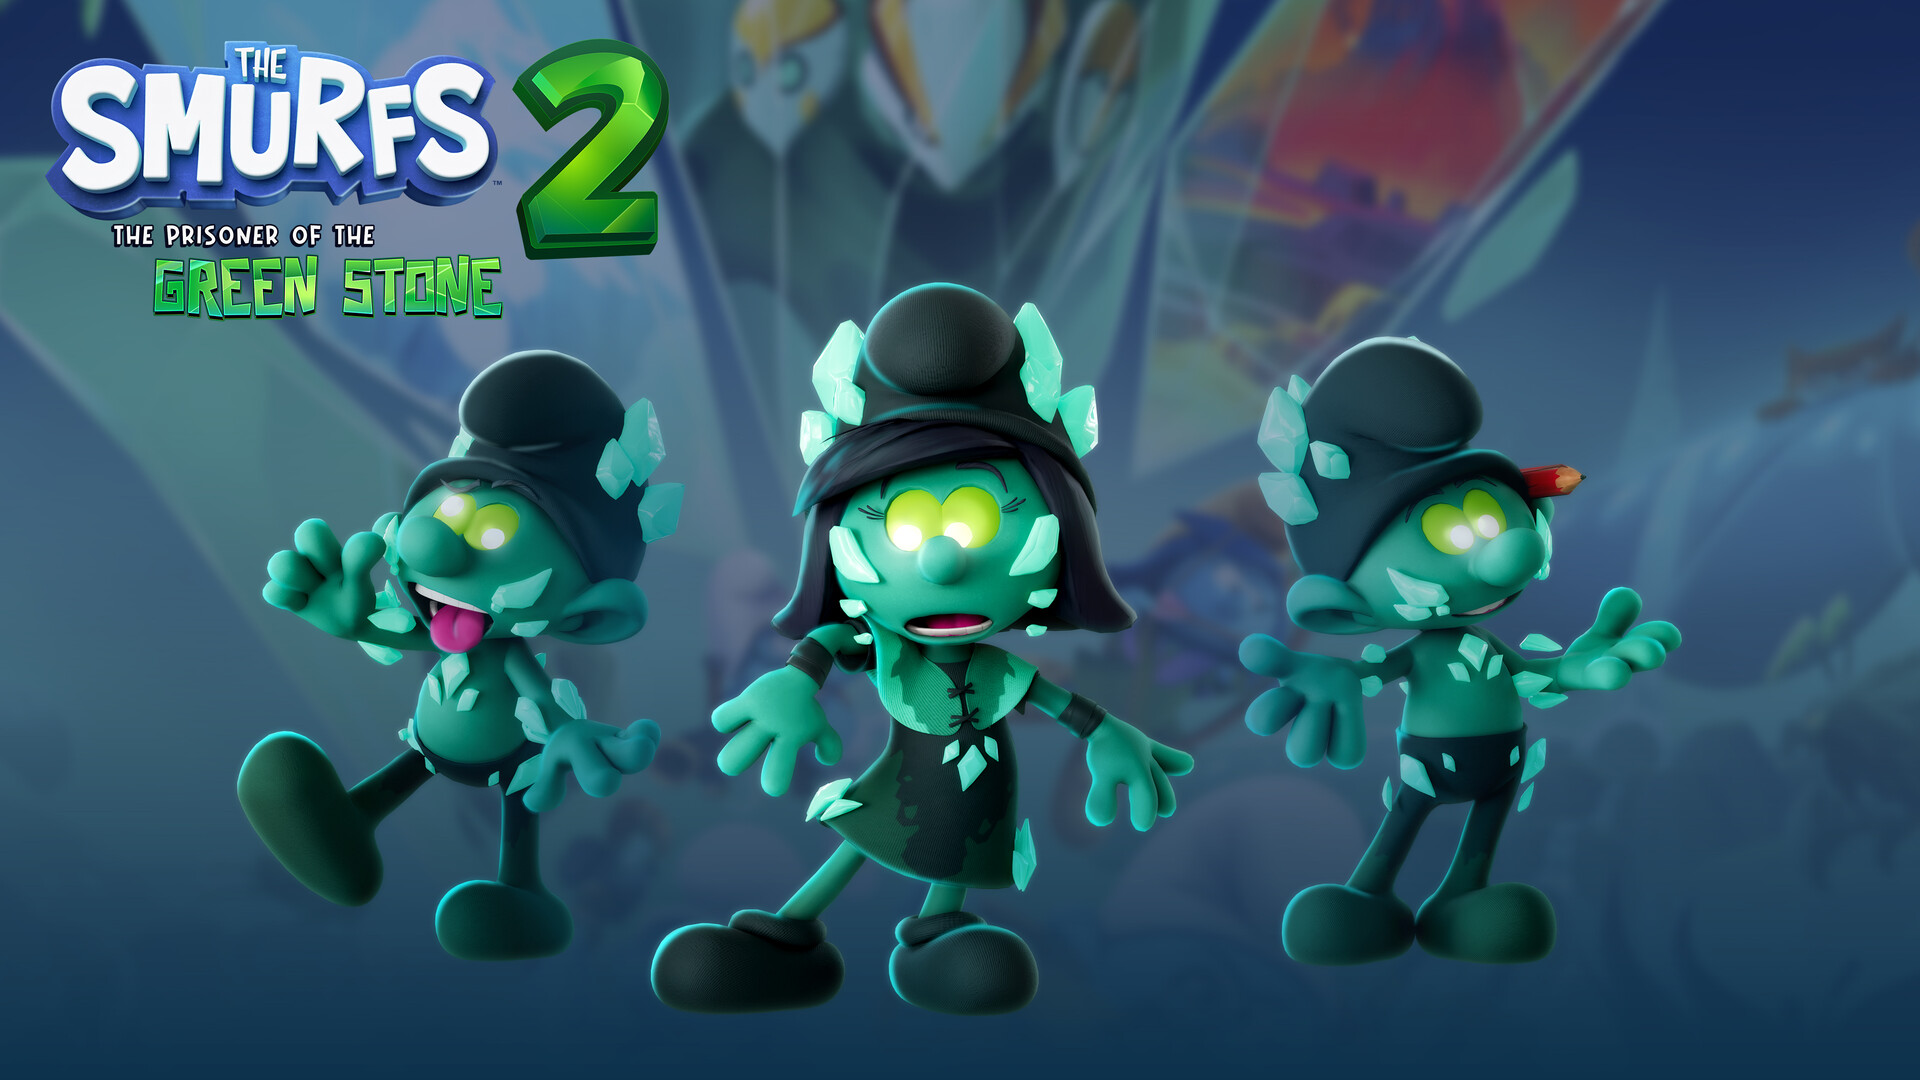 The Smurfs 2: The Prisoner of the Green Stone - Corrupted Outfit DLC GOG CD Key, 1.3 usd